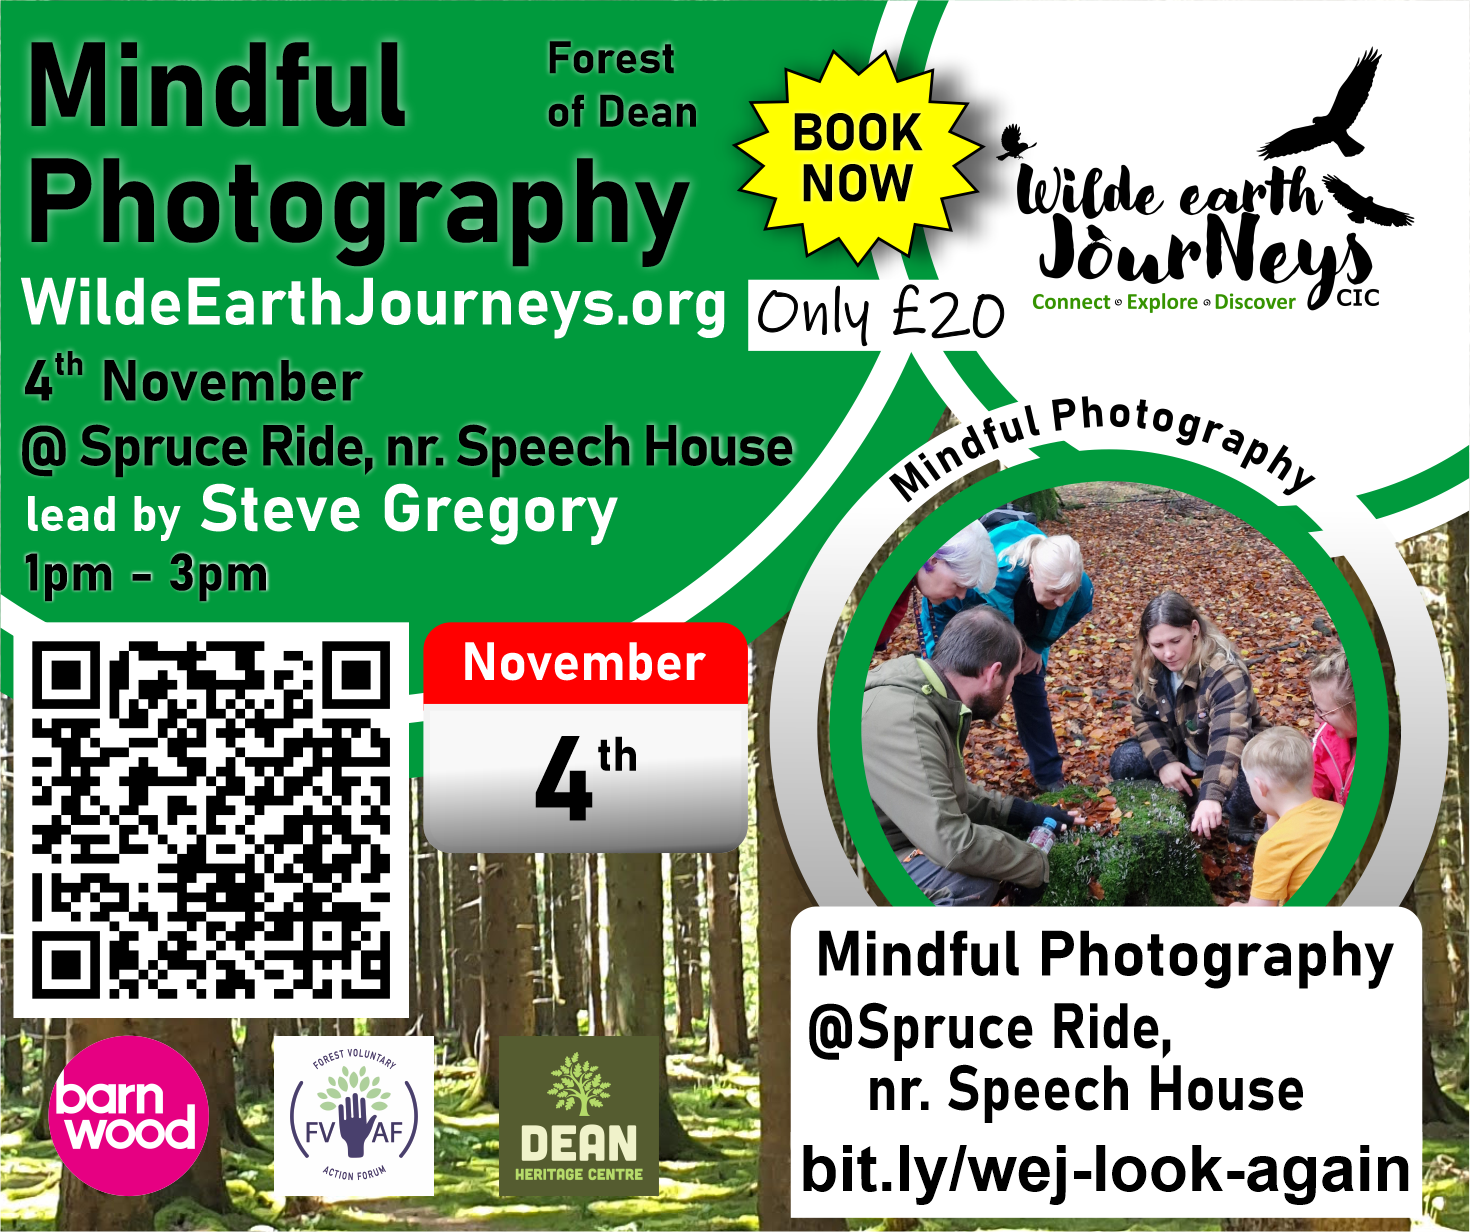 Mindful Photography session being held on Saturday 4th November at Spruce Ride, near Speech House Hotel in the Forest of Dean. Places are only £20